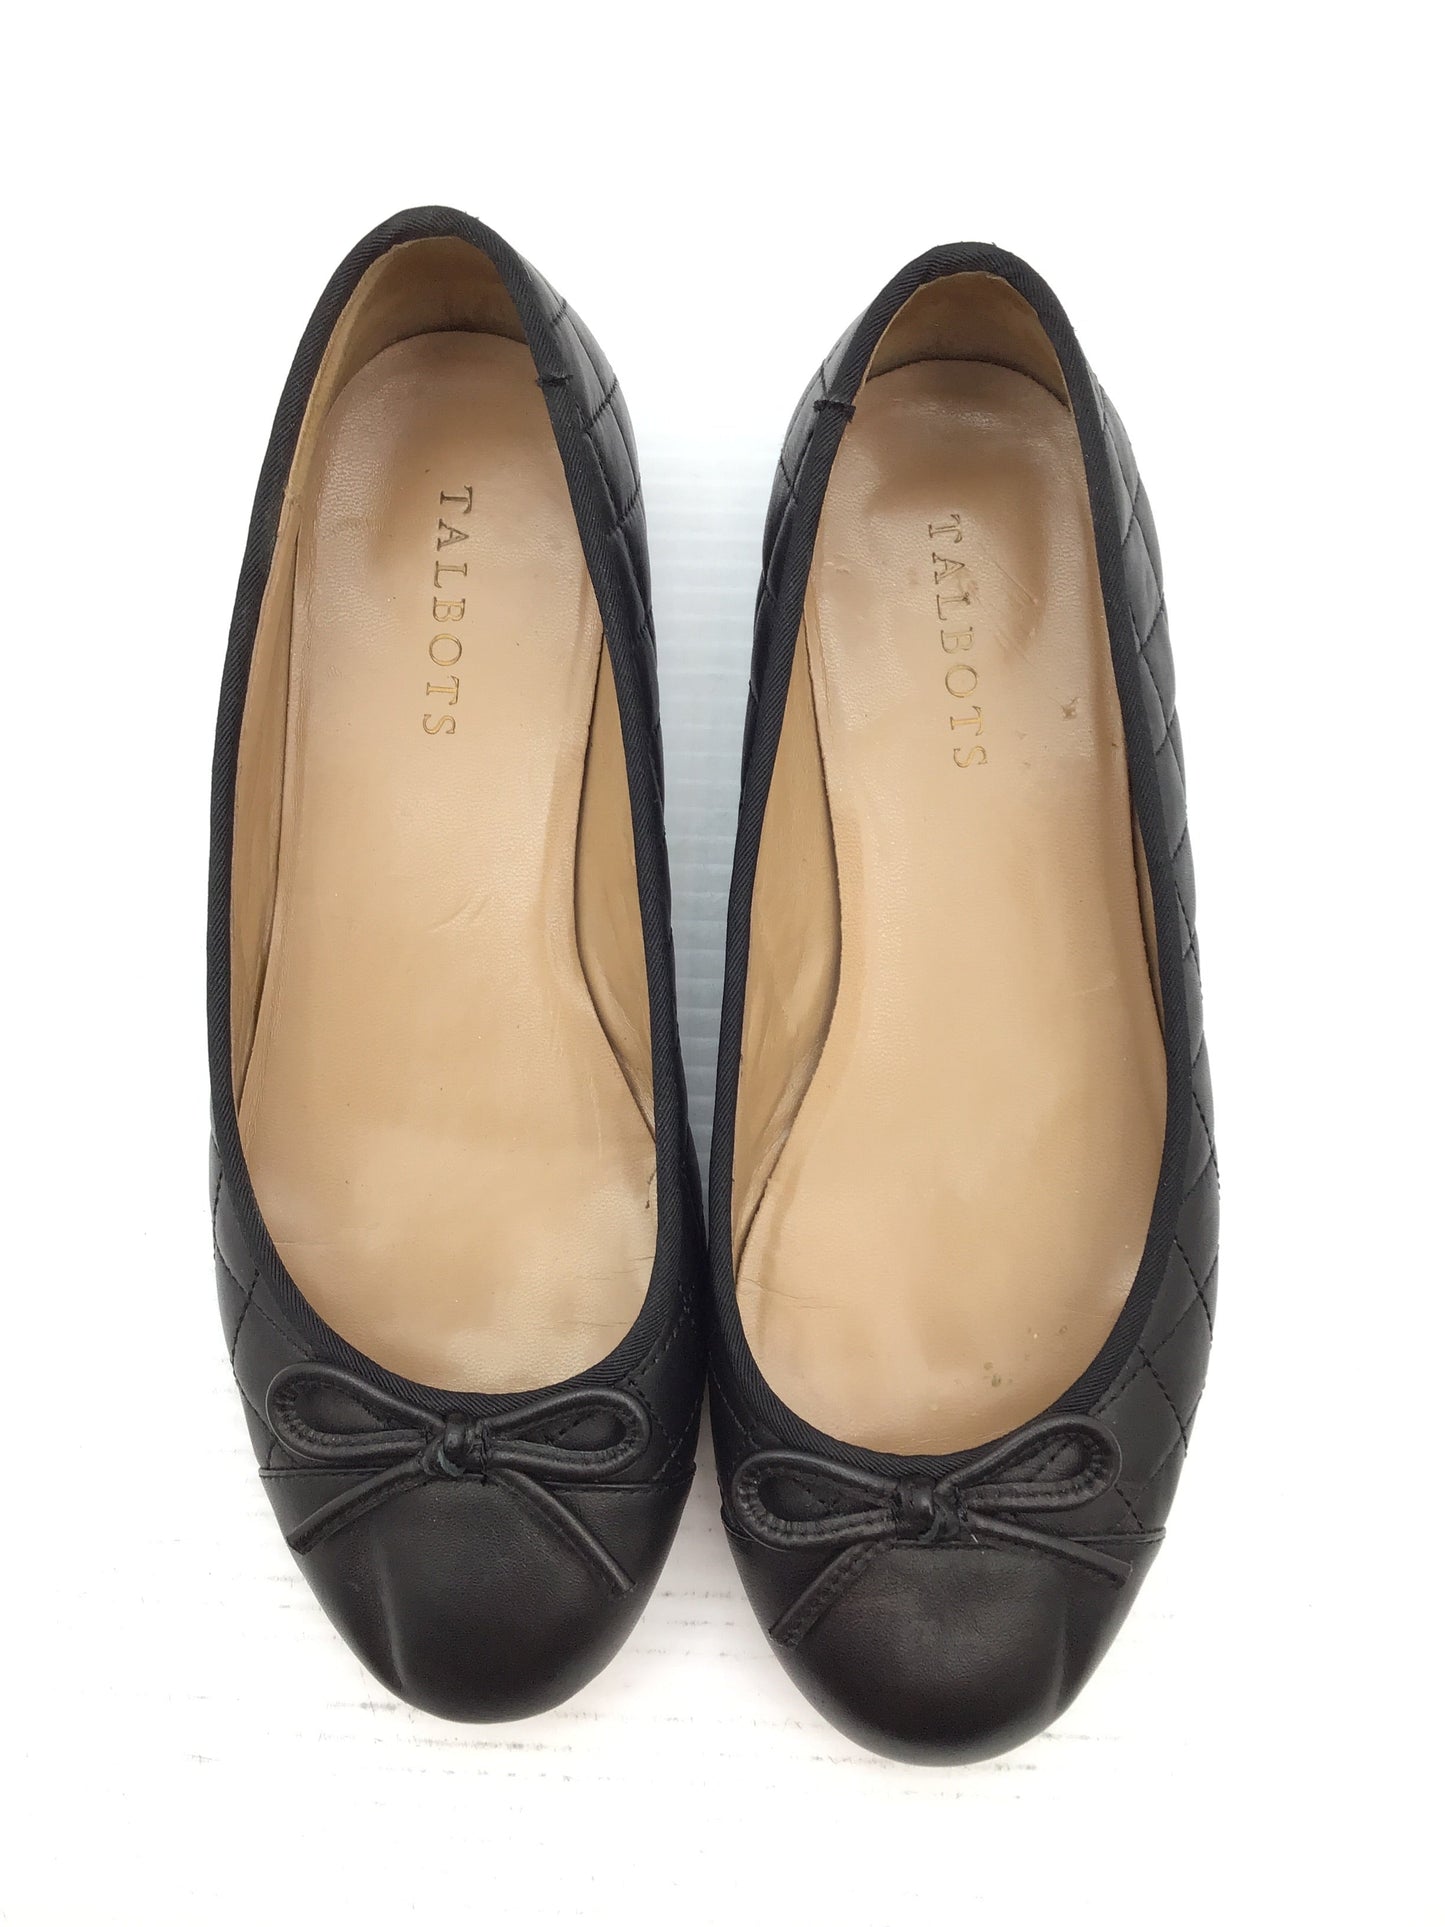 Shoes Flats Ballet By Talbots  Size: 7